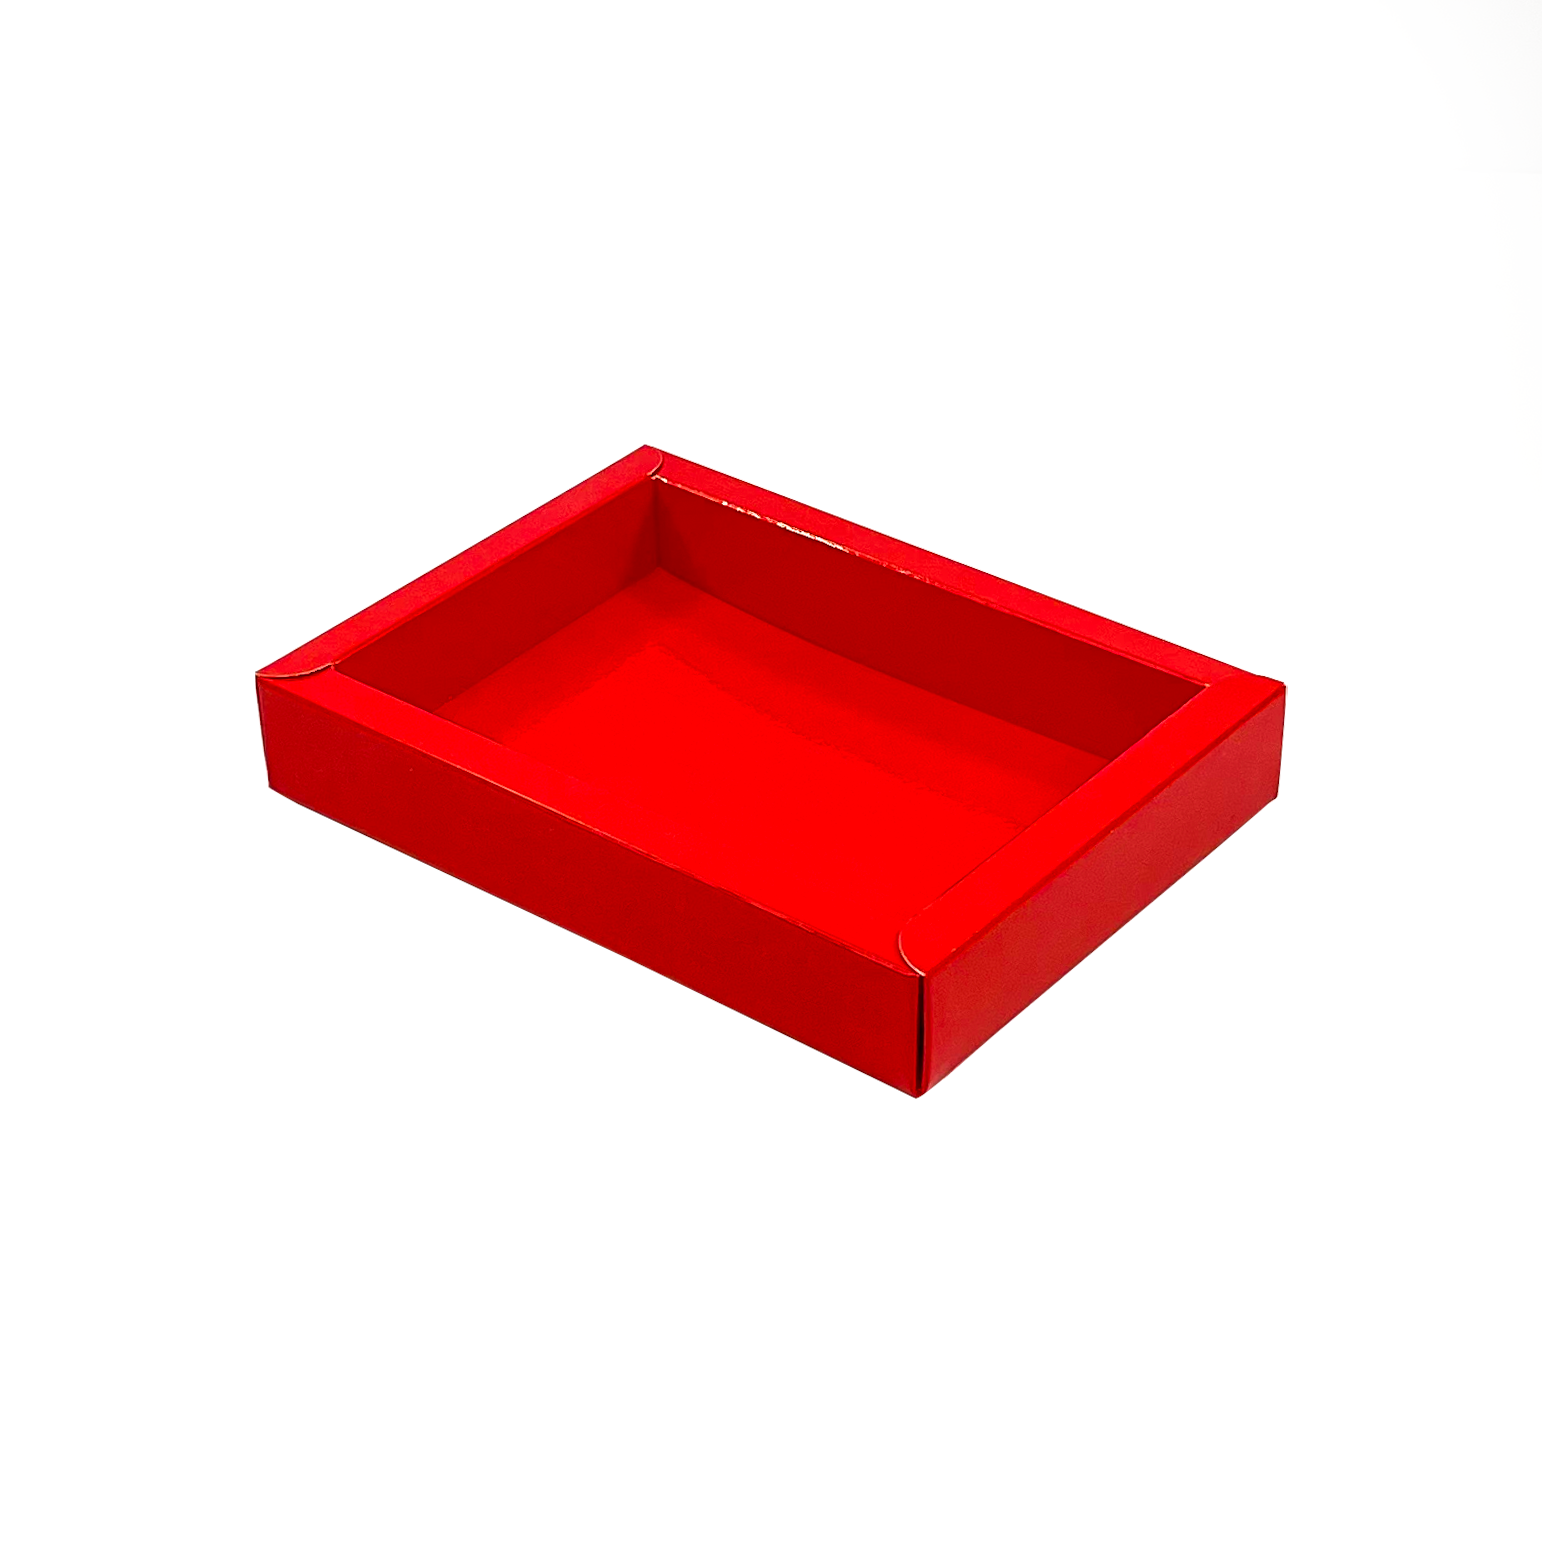 GK1 Window box with transparant lid (red) - 1130*90*27mm - 100 pieces